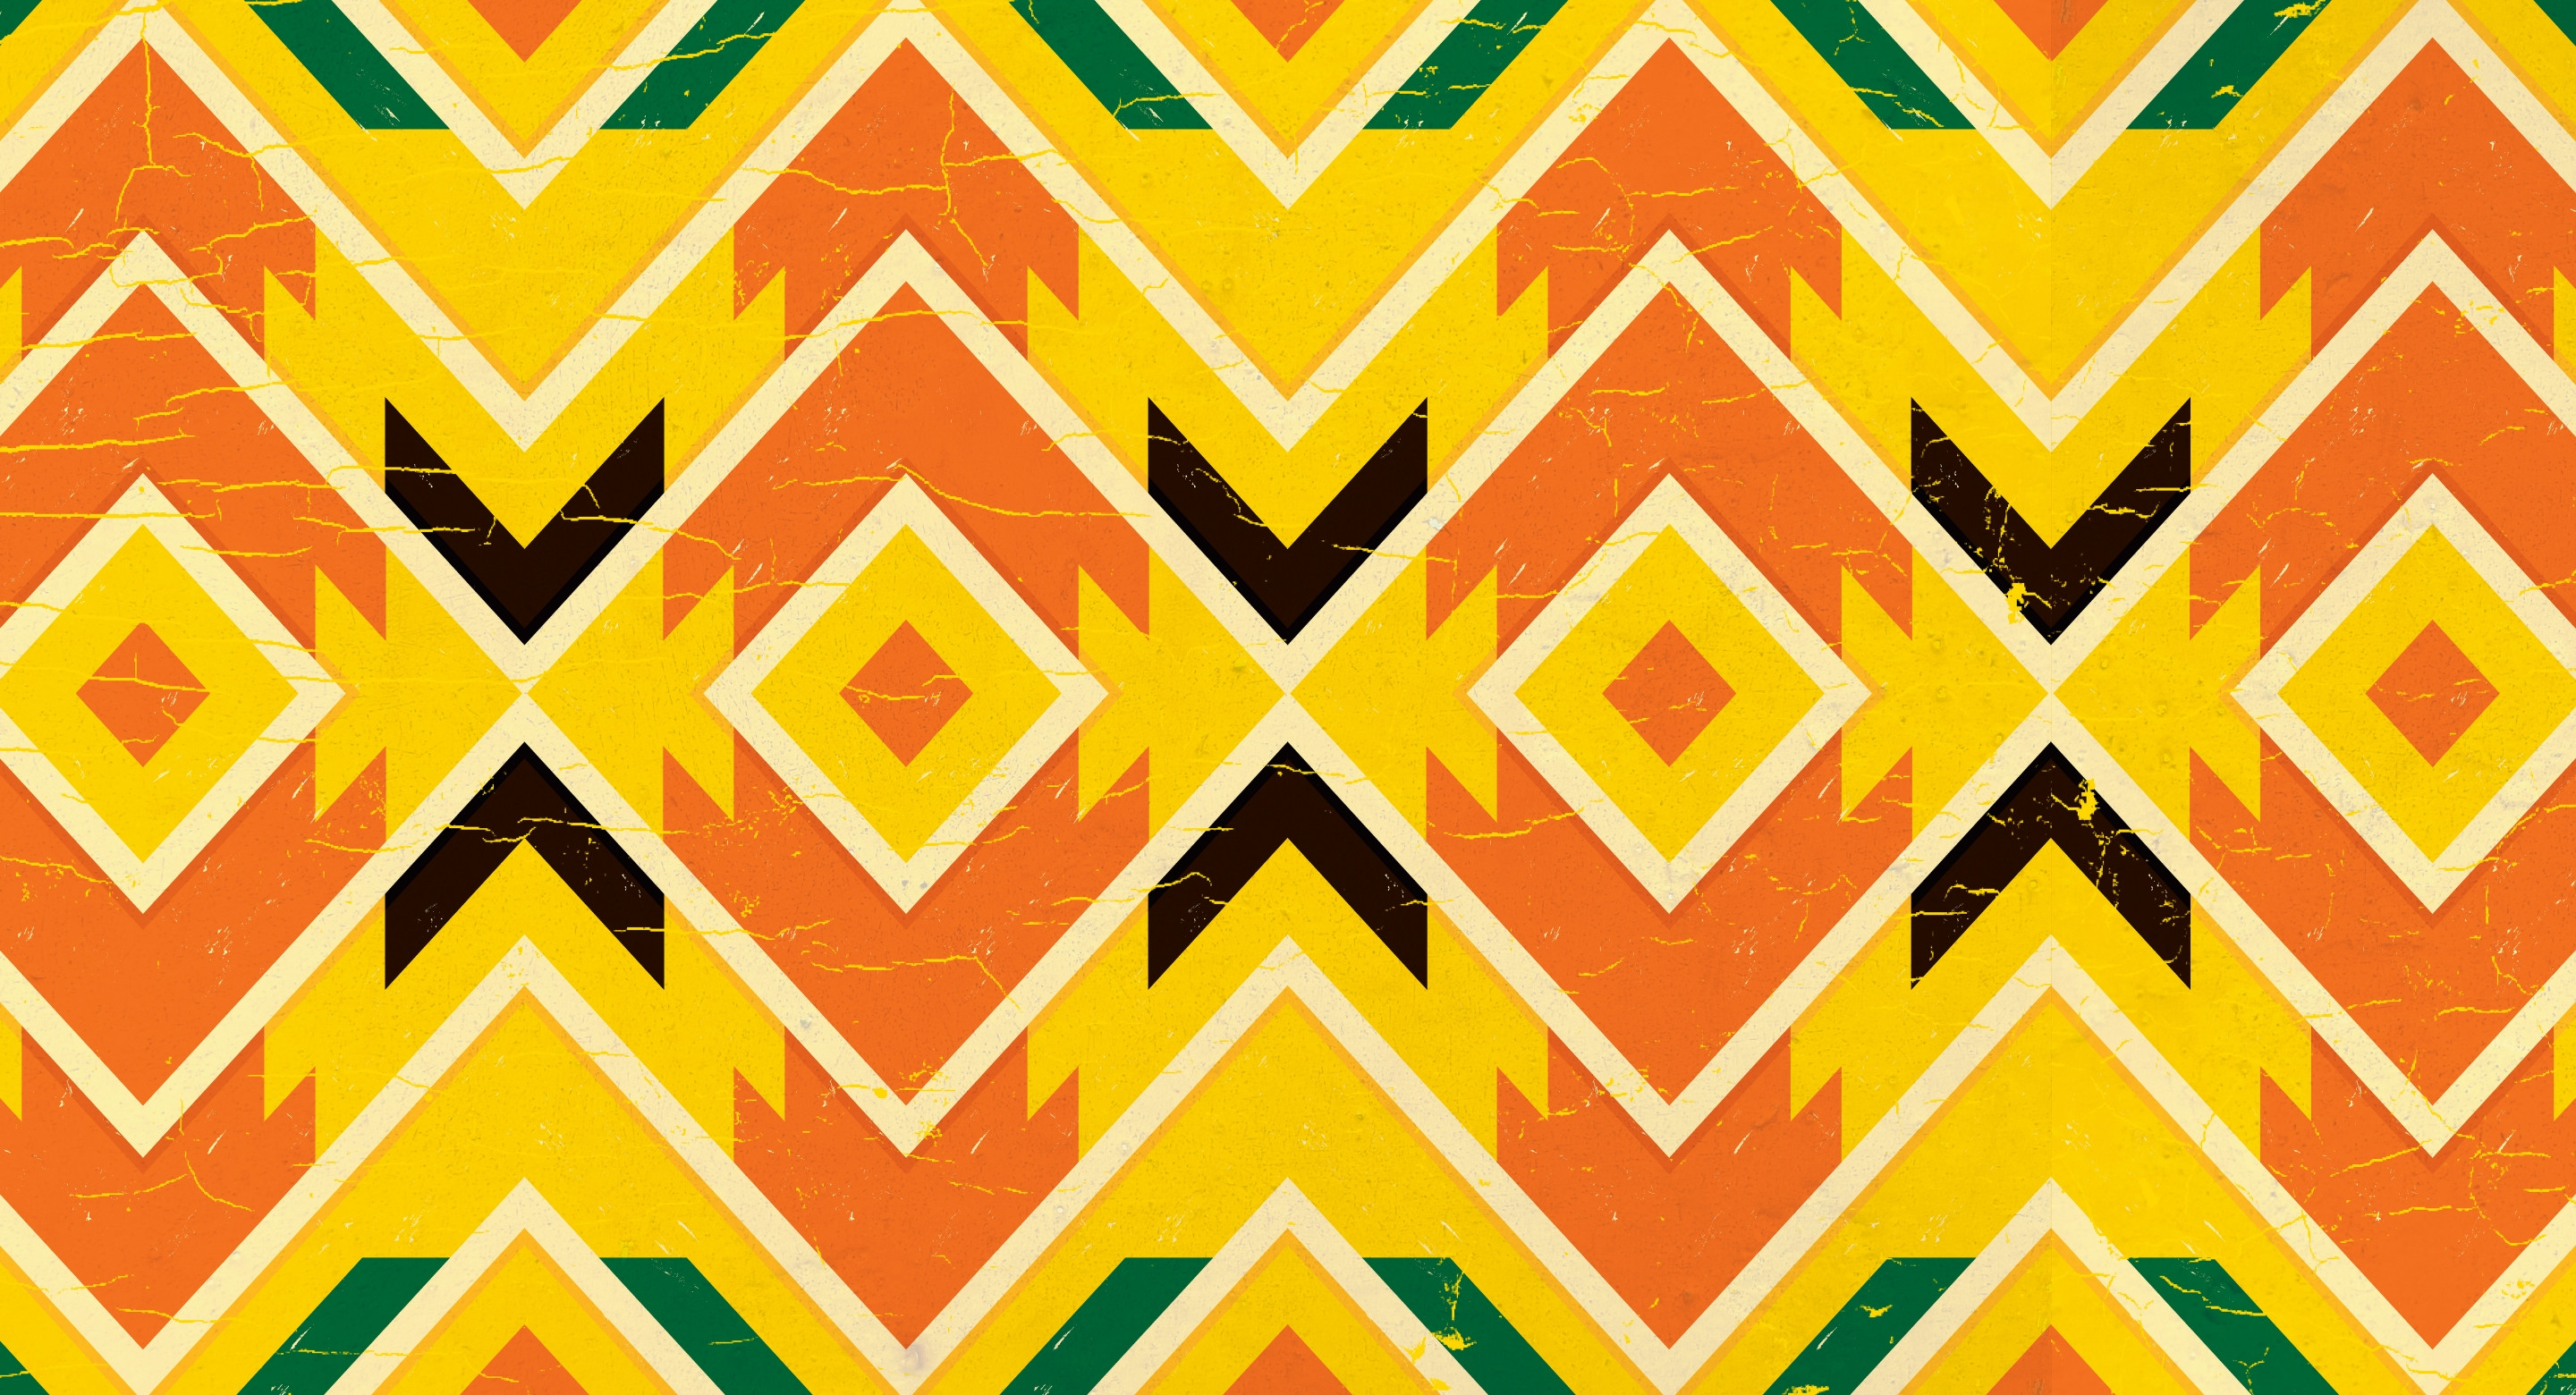 Chester Zoo pattern design by Root Studio